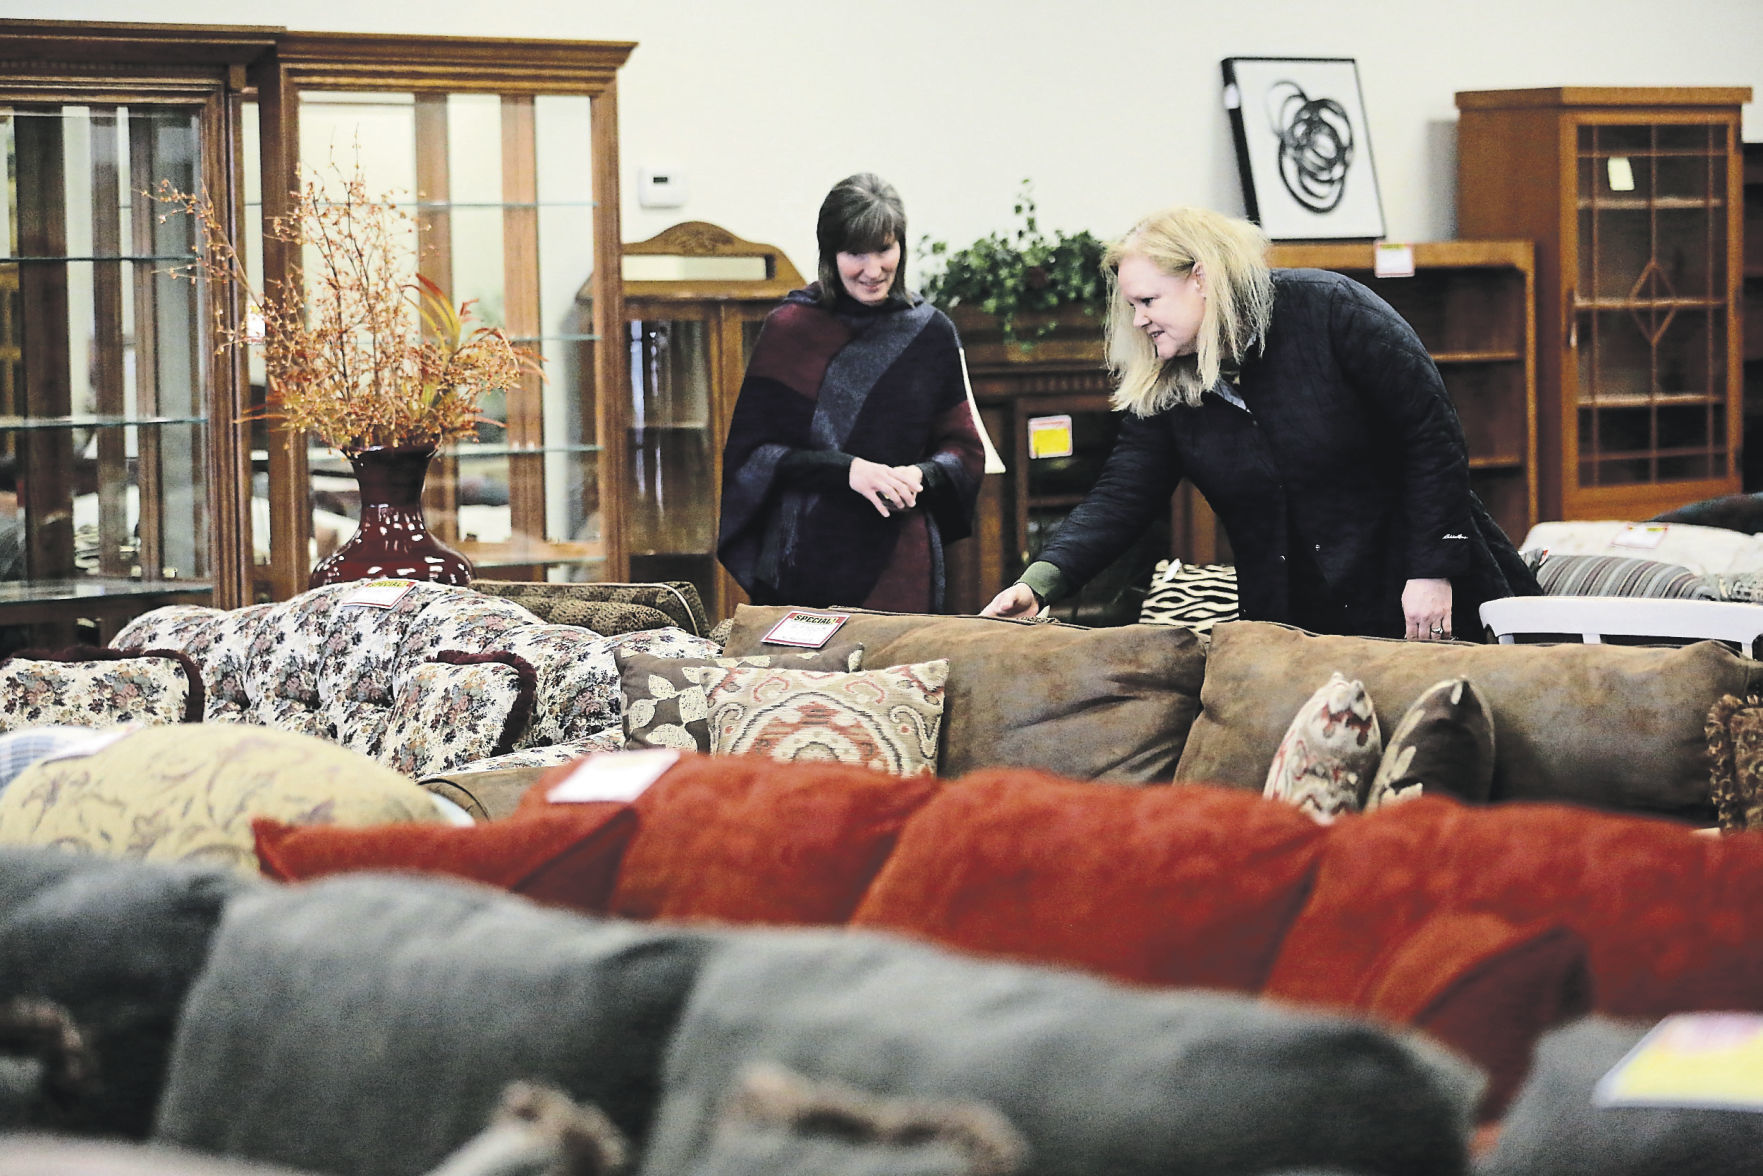 Lois Thurston (left) helps customer Sue Tefft at Affordable Furniture in Dubuque. PHOTO CREDIT: EILEEN MESLAR